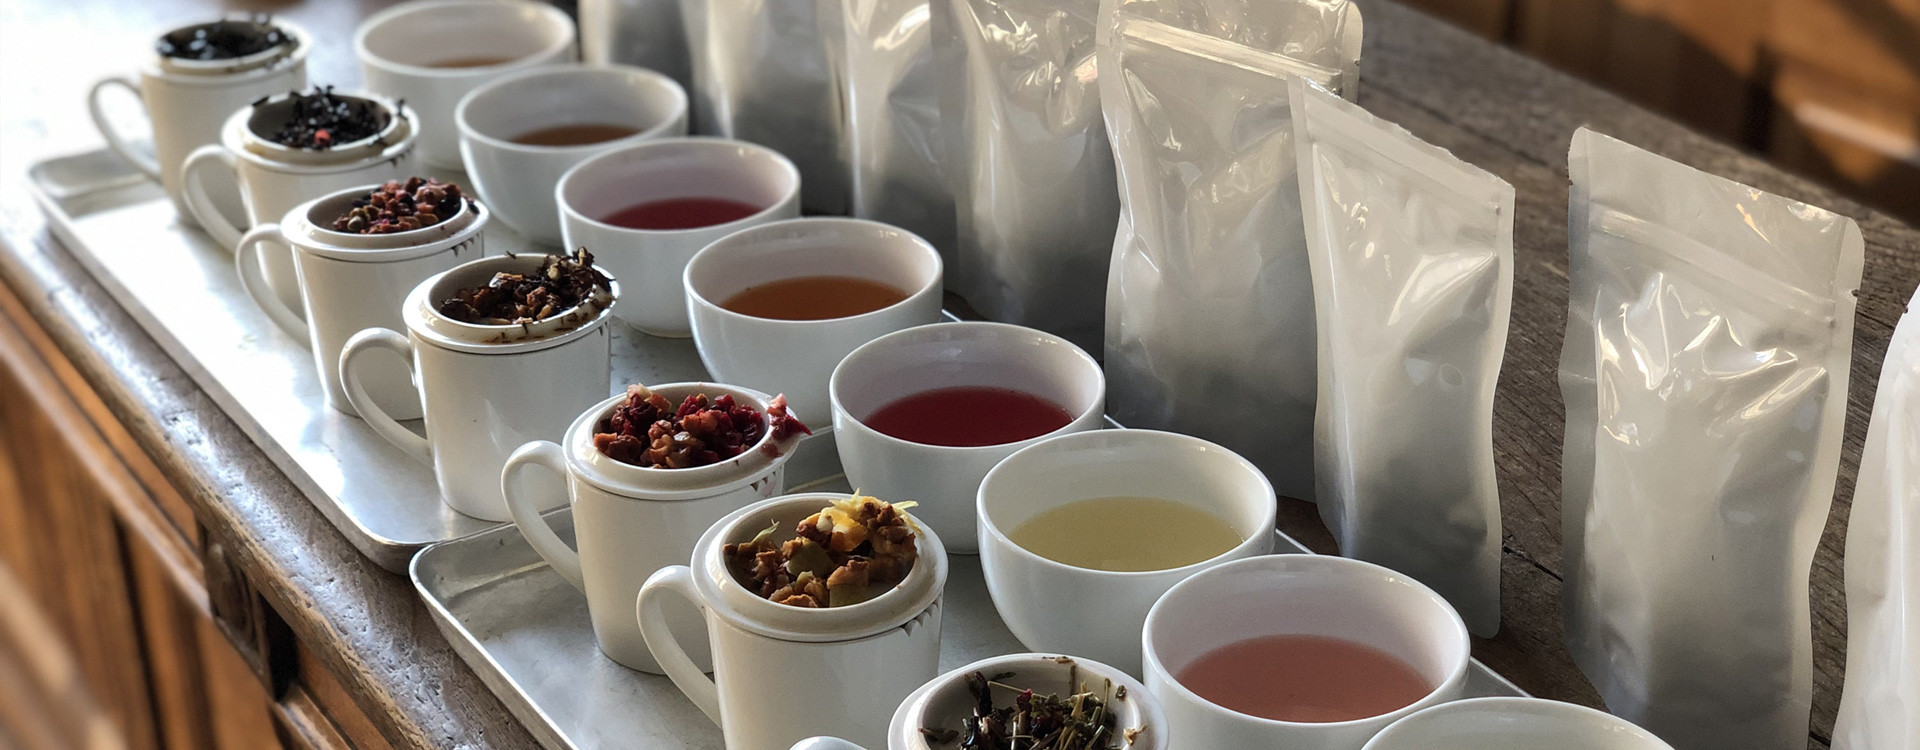 Black Tea Or Green Tea, What's The Difference? Which One Is Right For You?